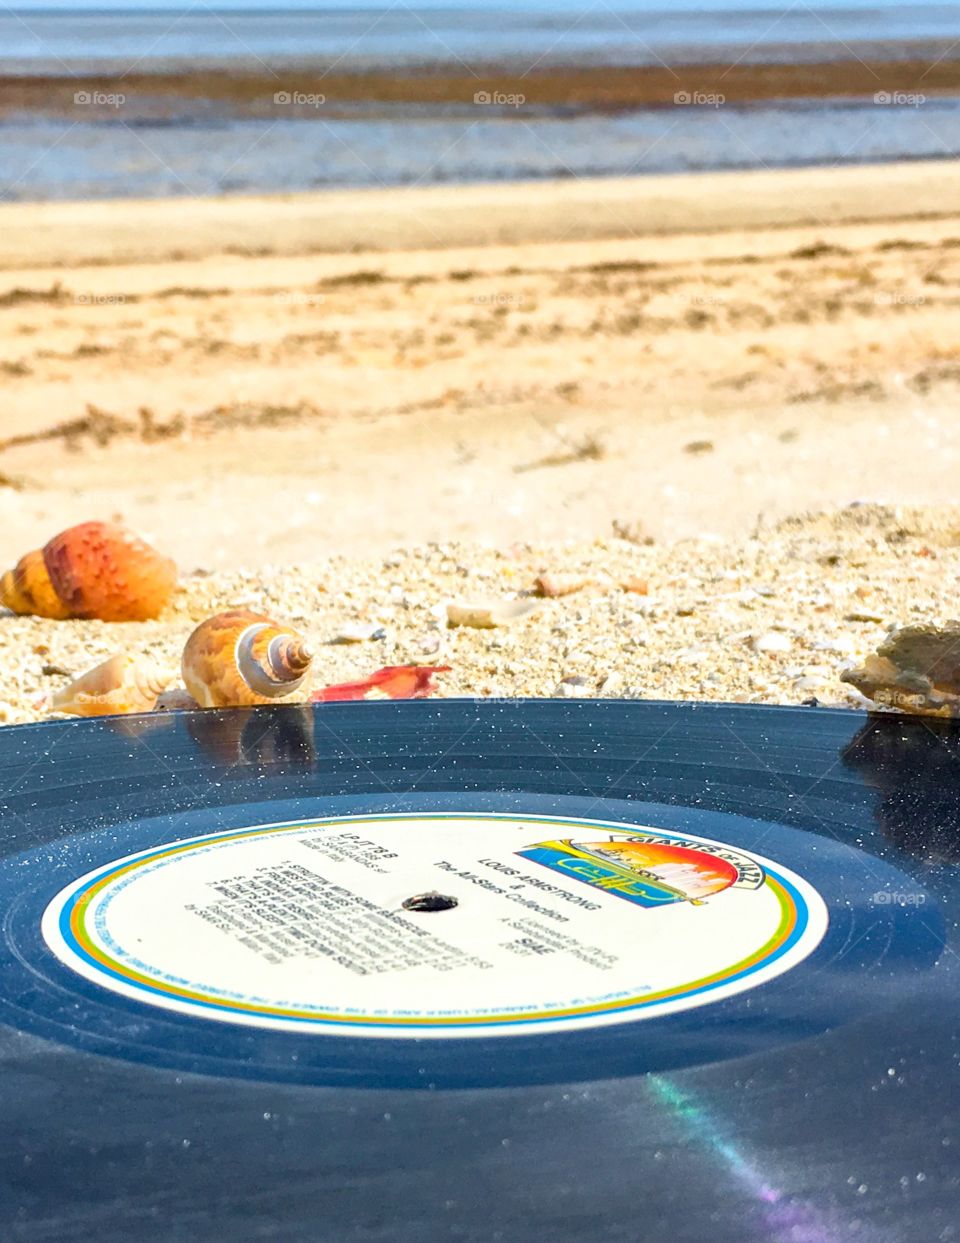 Records vinyls on the seashore, beach in the sand, ocean view and horizon 